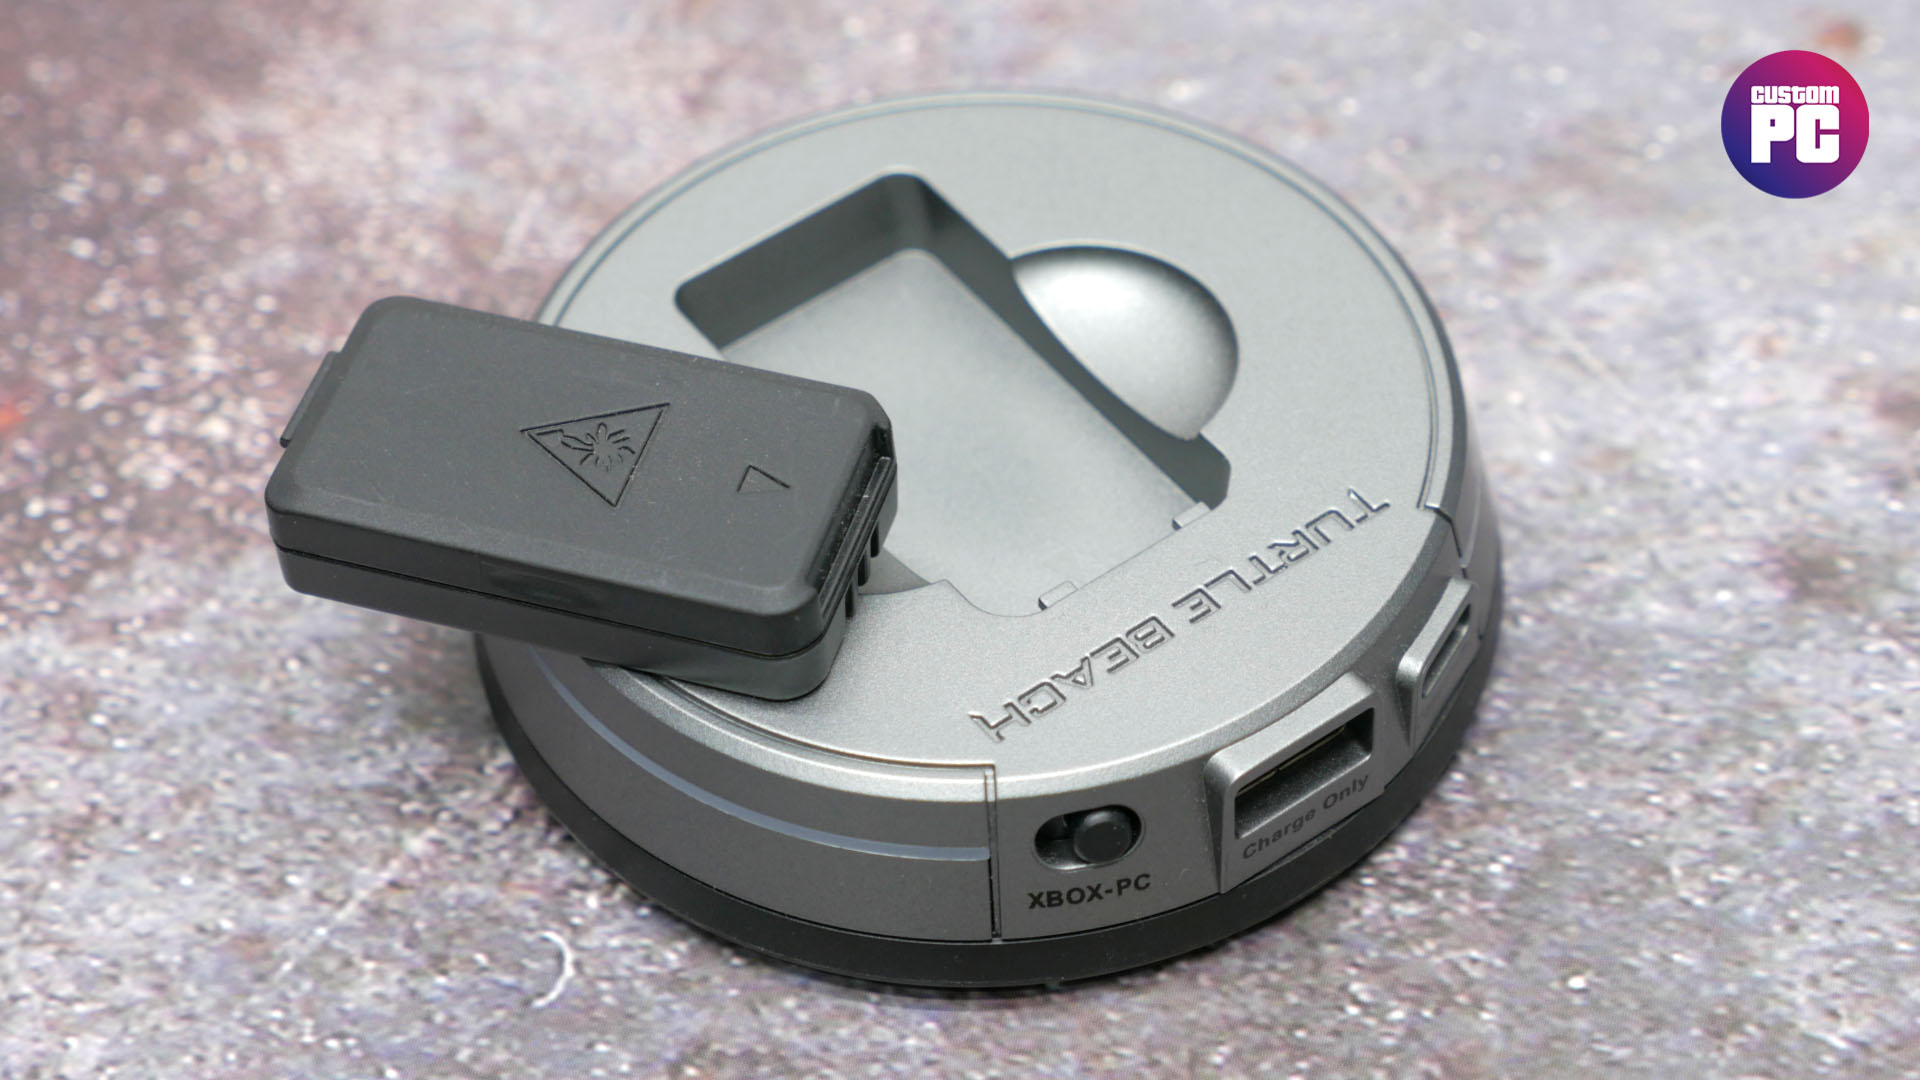 Turtle Beach Stealth Pro review 03 battery charger